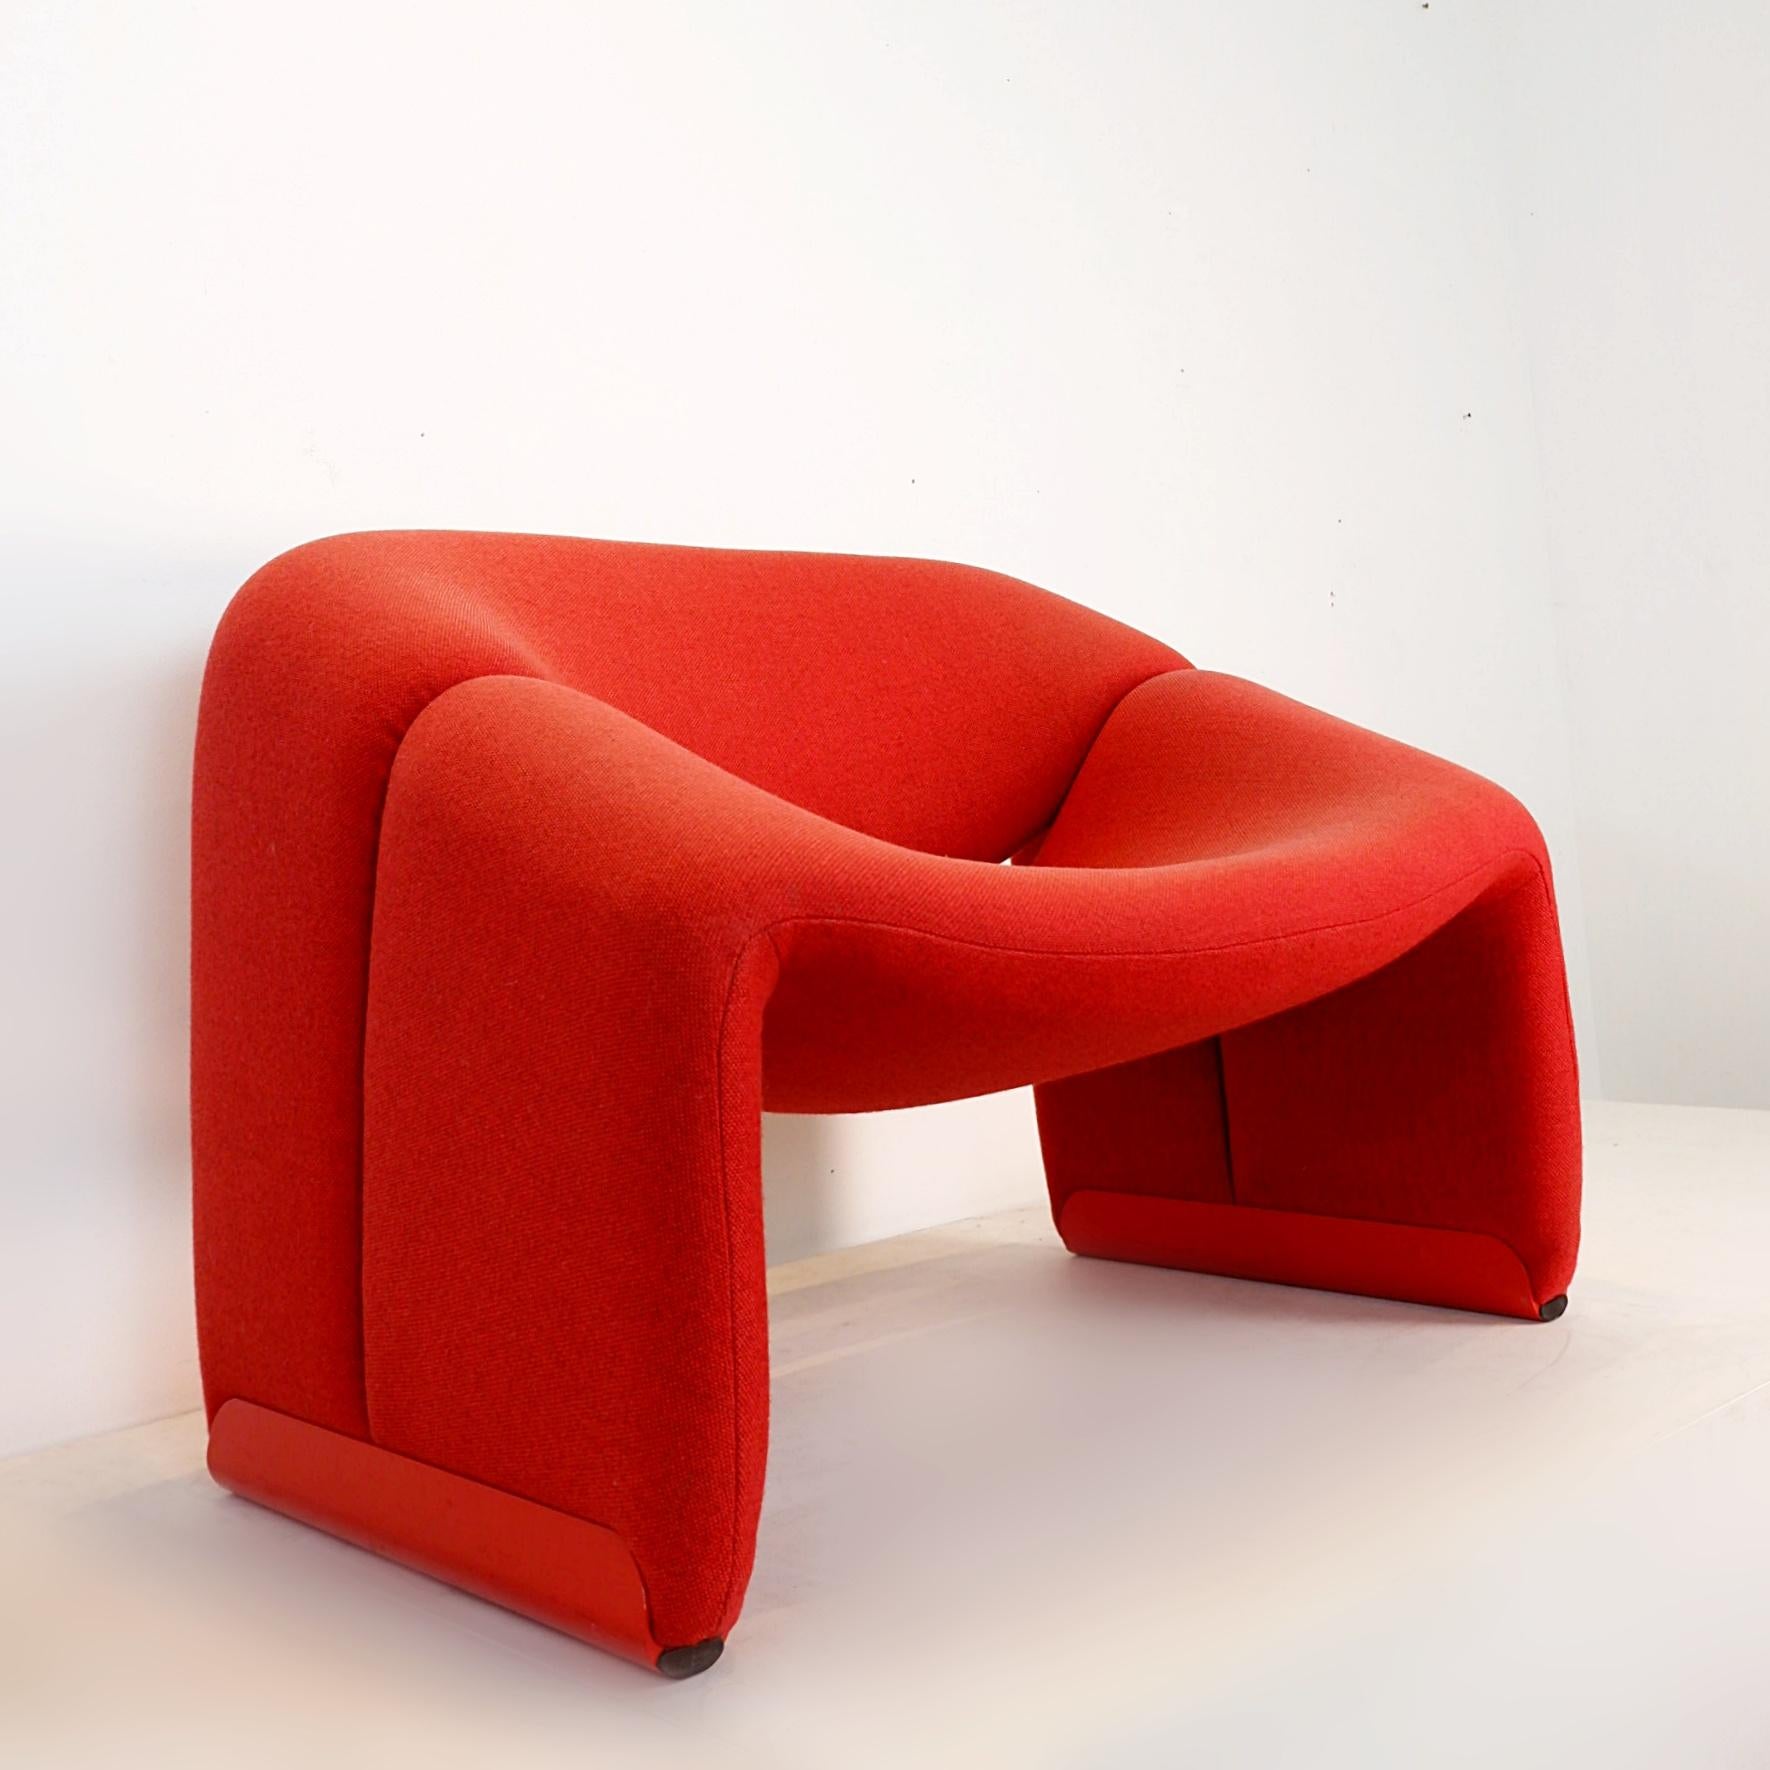 Iconic Groovy armchair designed by french designer Pierre Paulin for the Dutch editor Artifort. Their collaboration was a fruitful one. Their worked peaked in popularity with the Space Age, and this can be explained with Paulin's style. His fluid